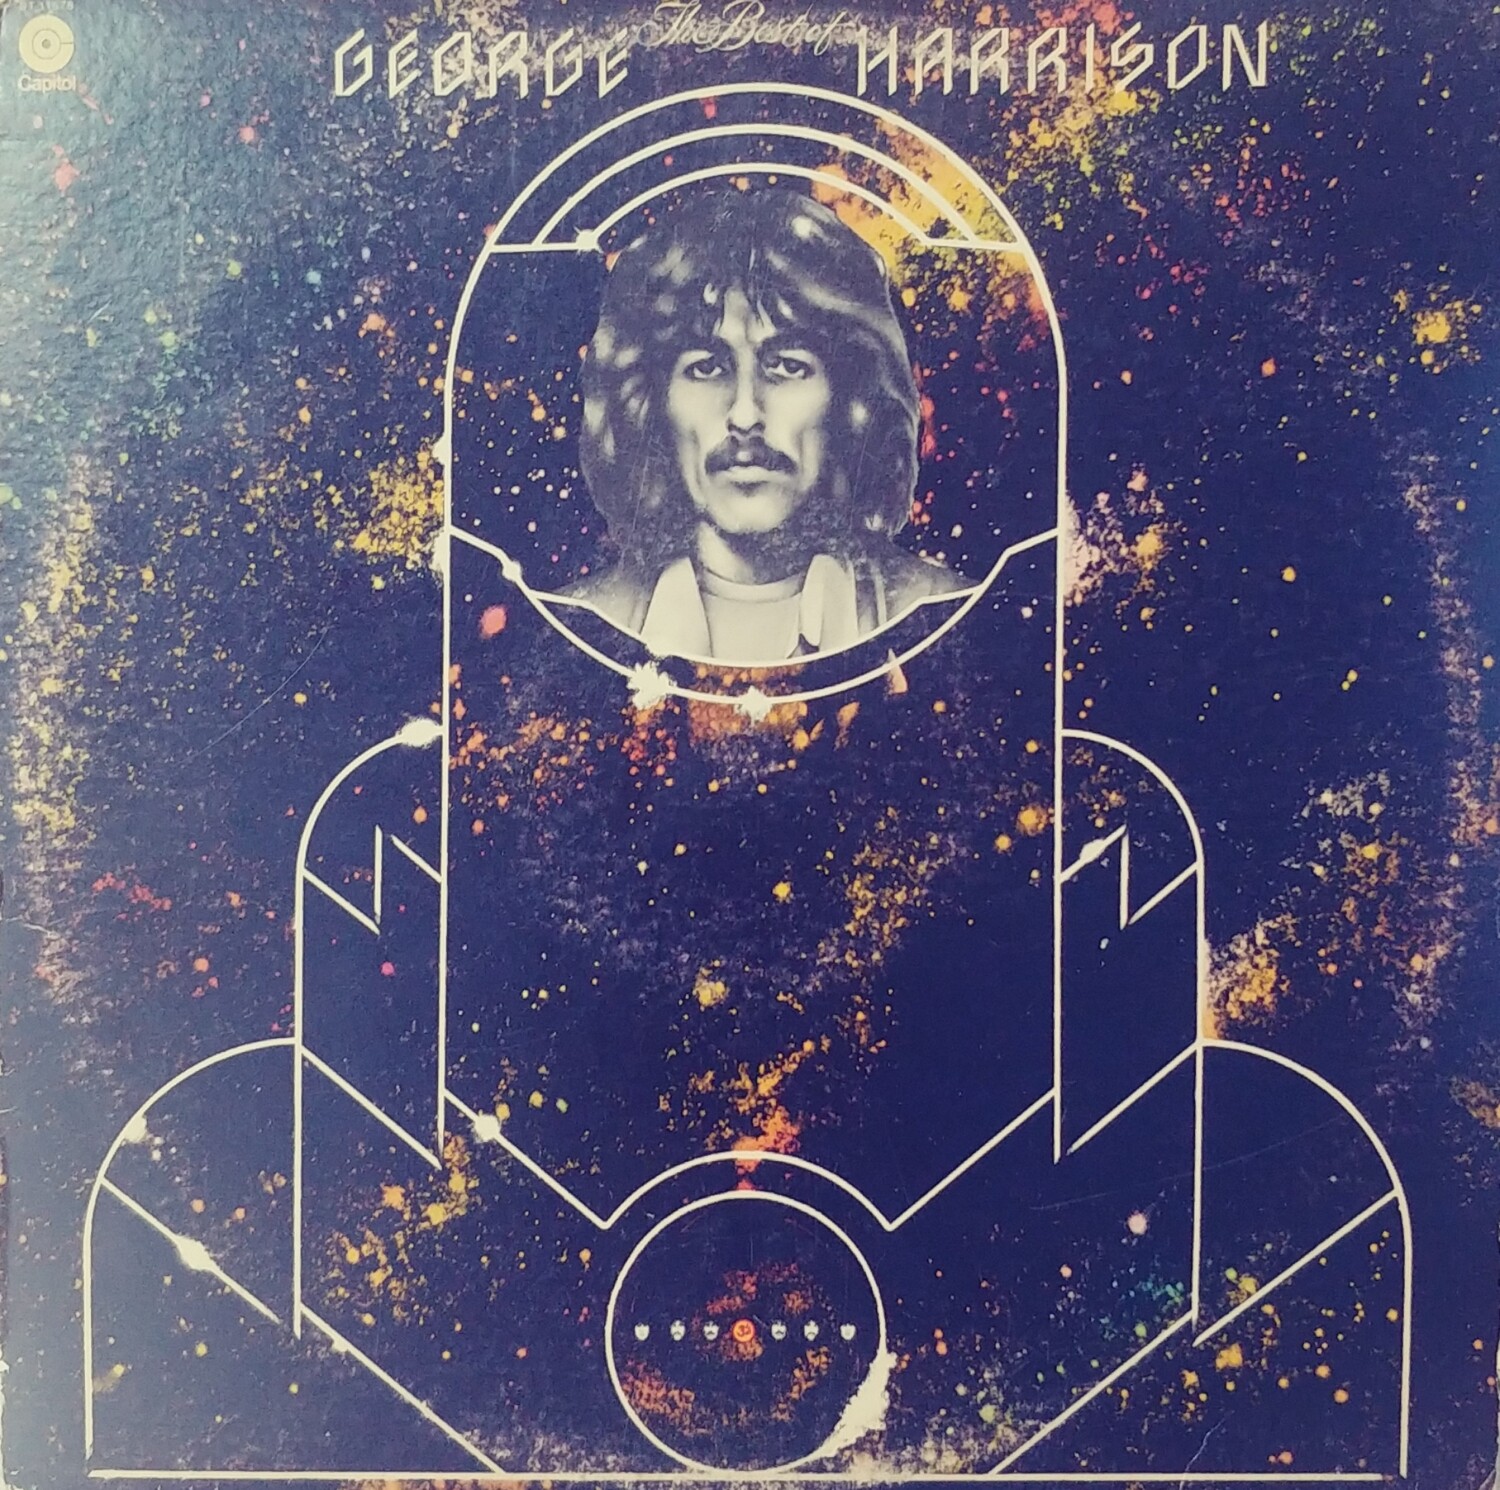 George Harrison - The Best of